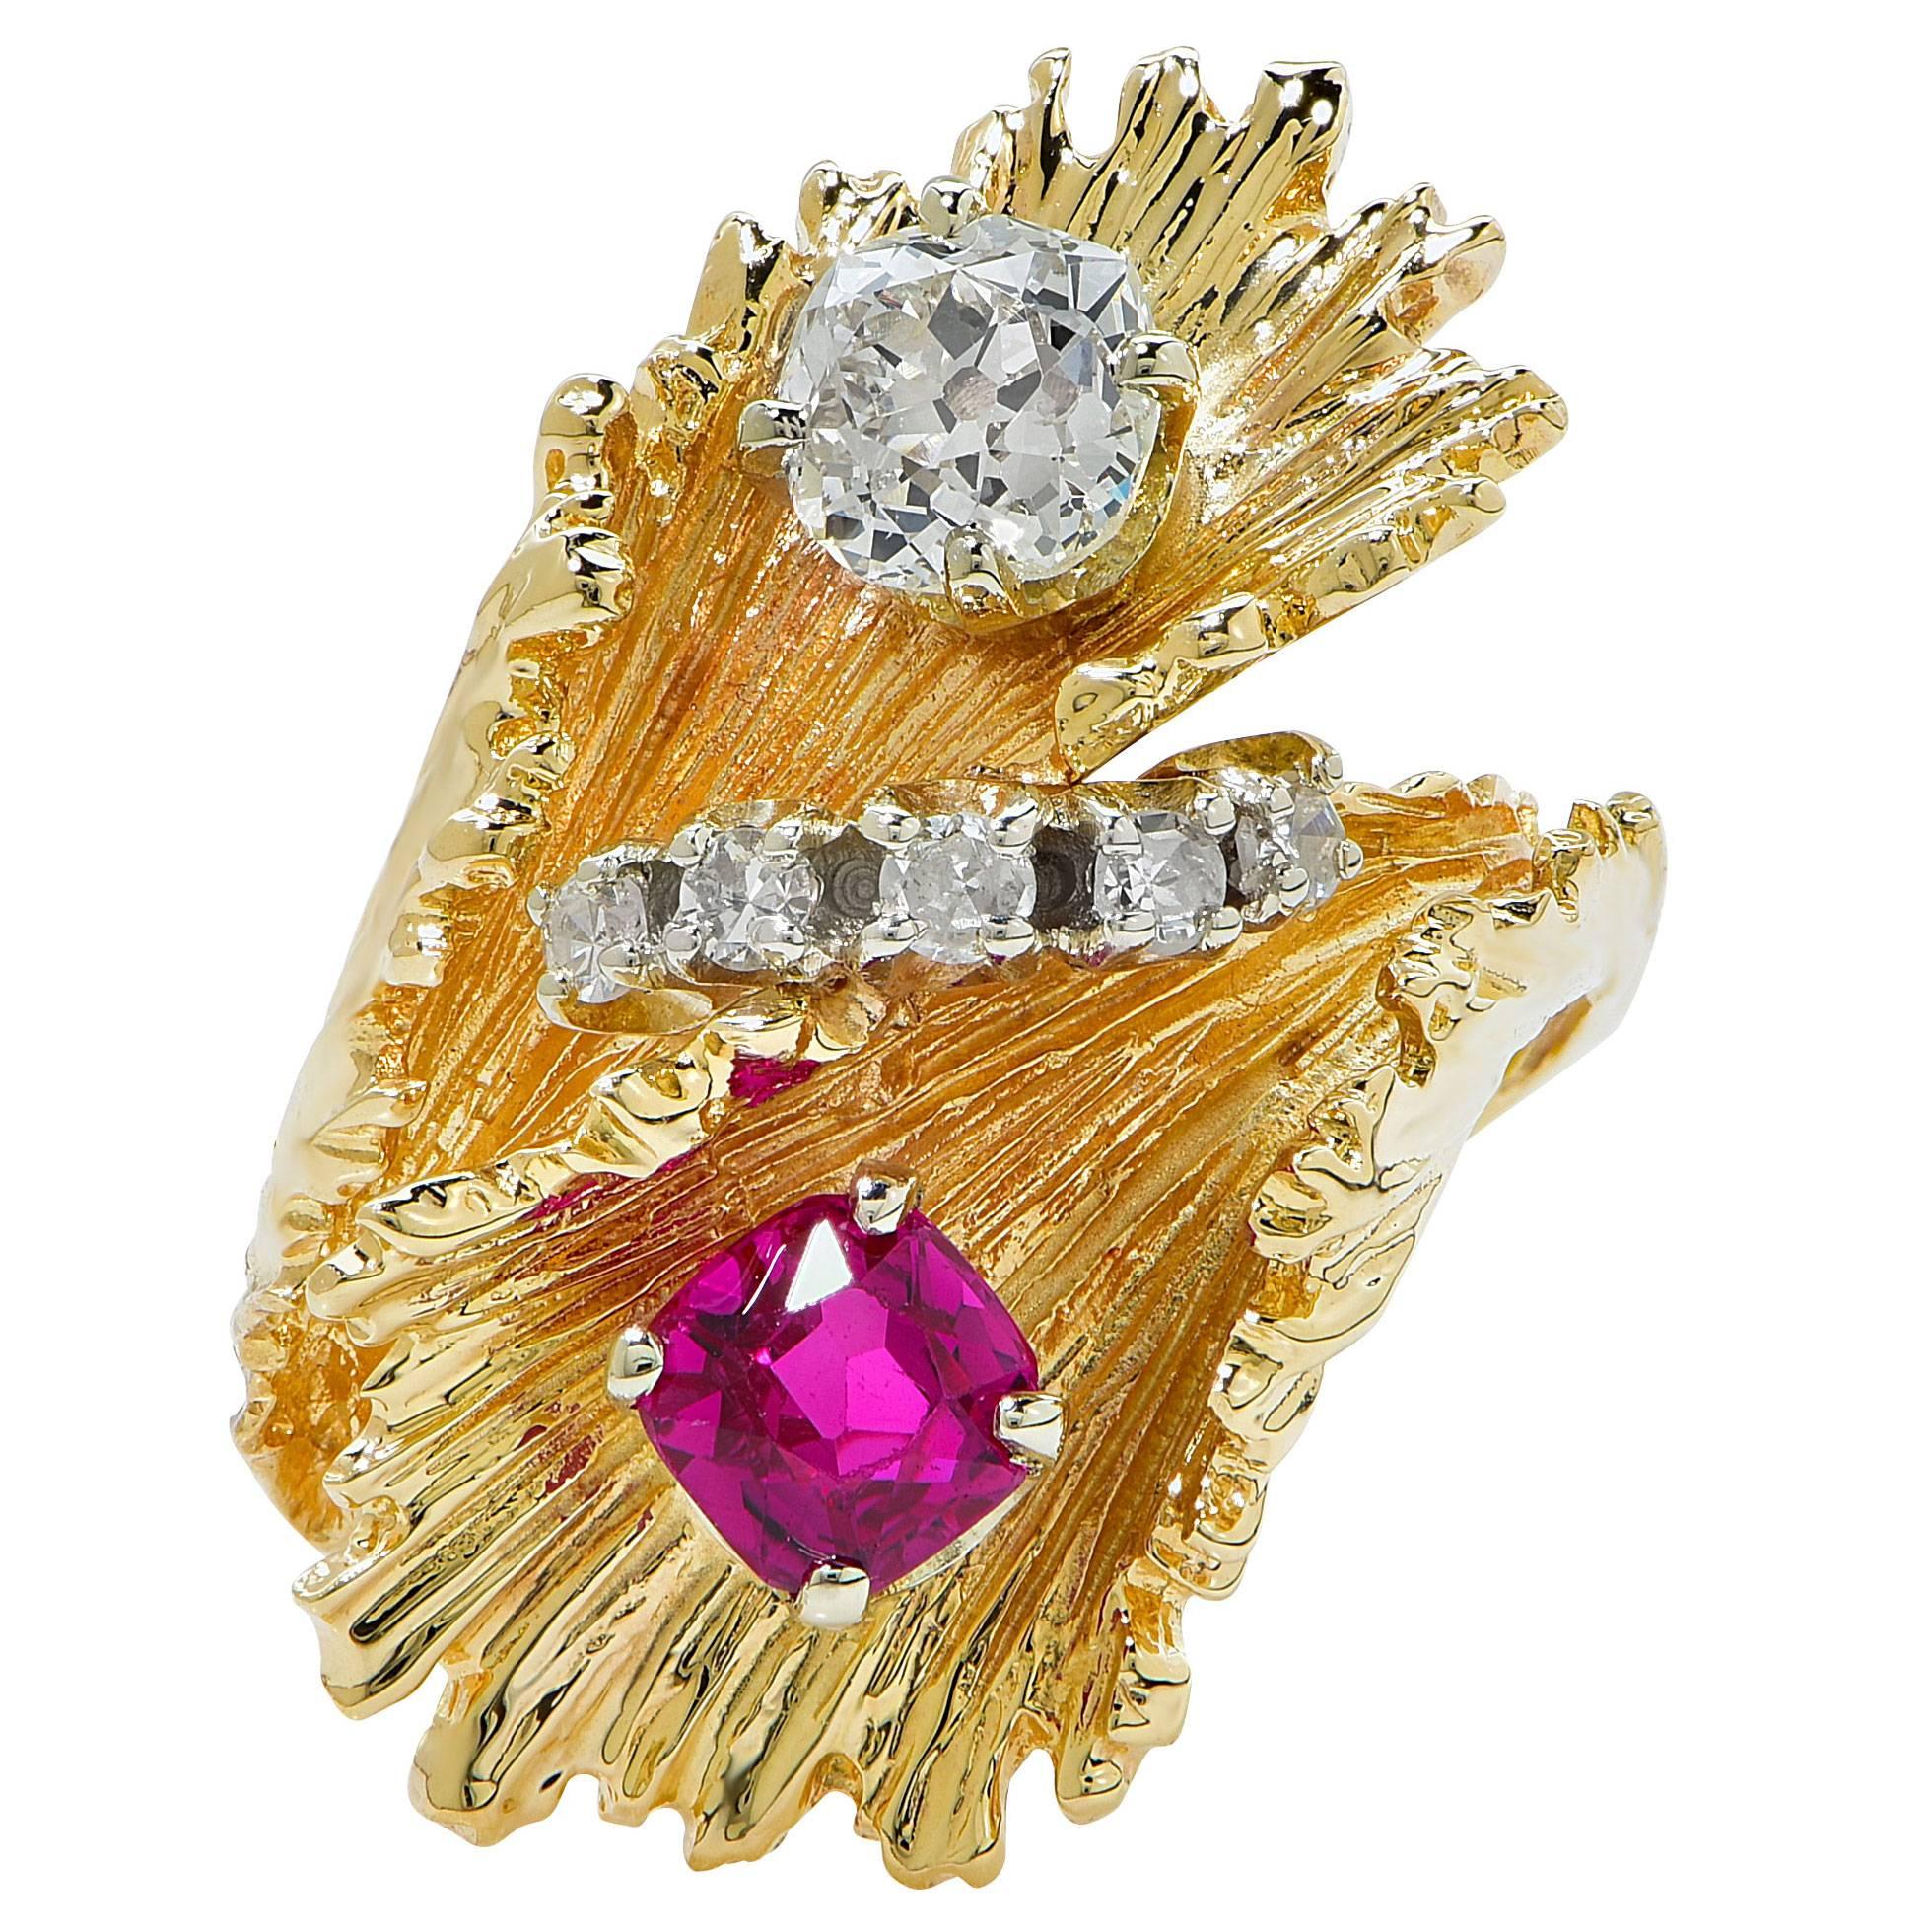 Original diamond and ruby leaf ring featuring a lively red ruby with an estimated weight of one carat and an old European cut diamond with an estimated weight of .75ct a row of 5 single cut diamonds finishes off the design with an estimated total